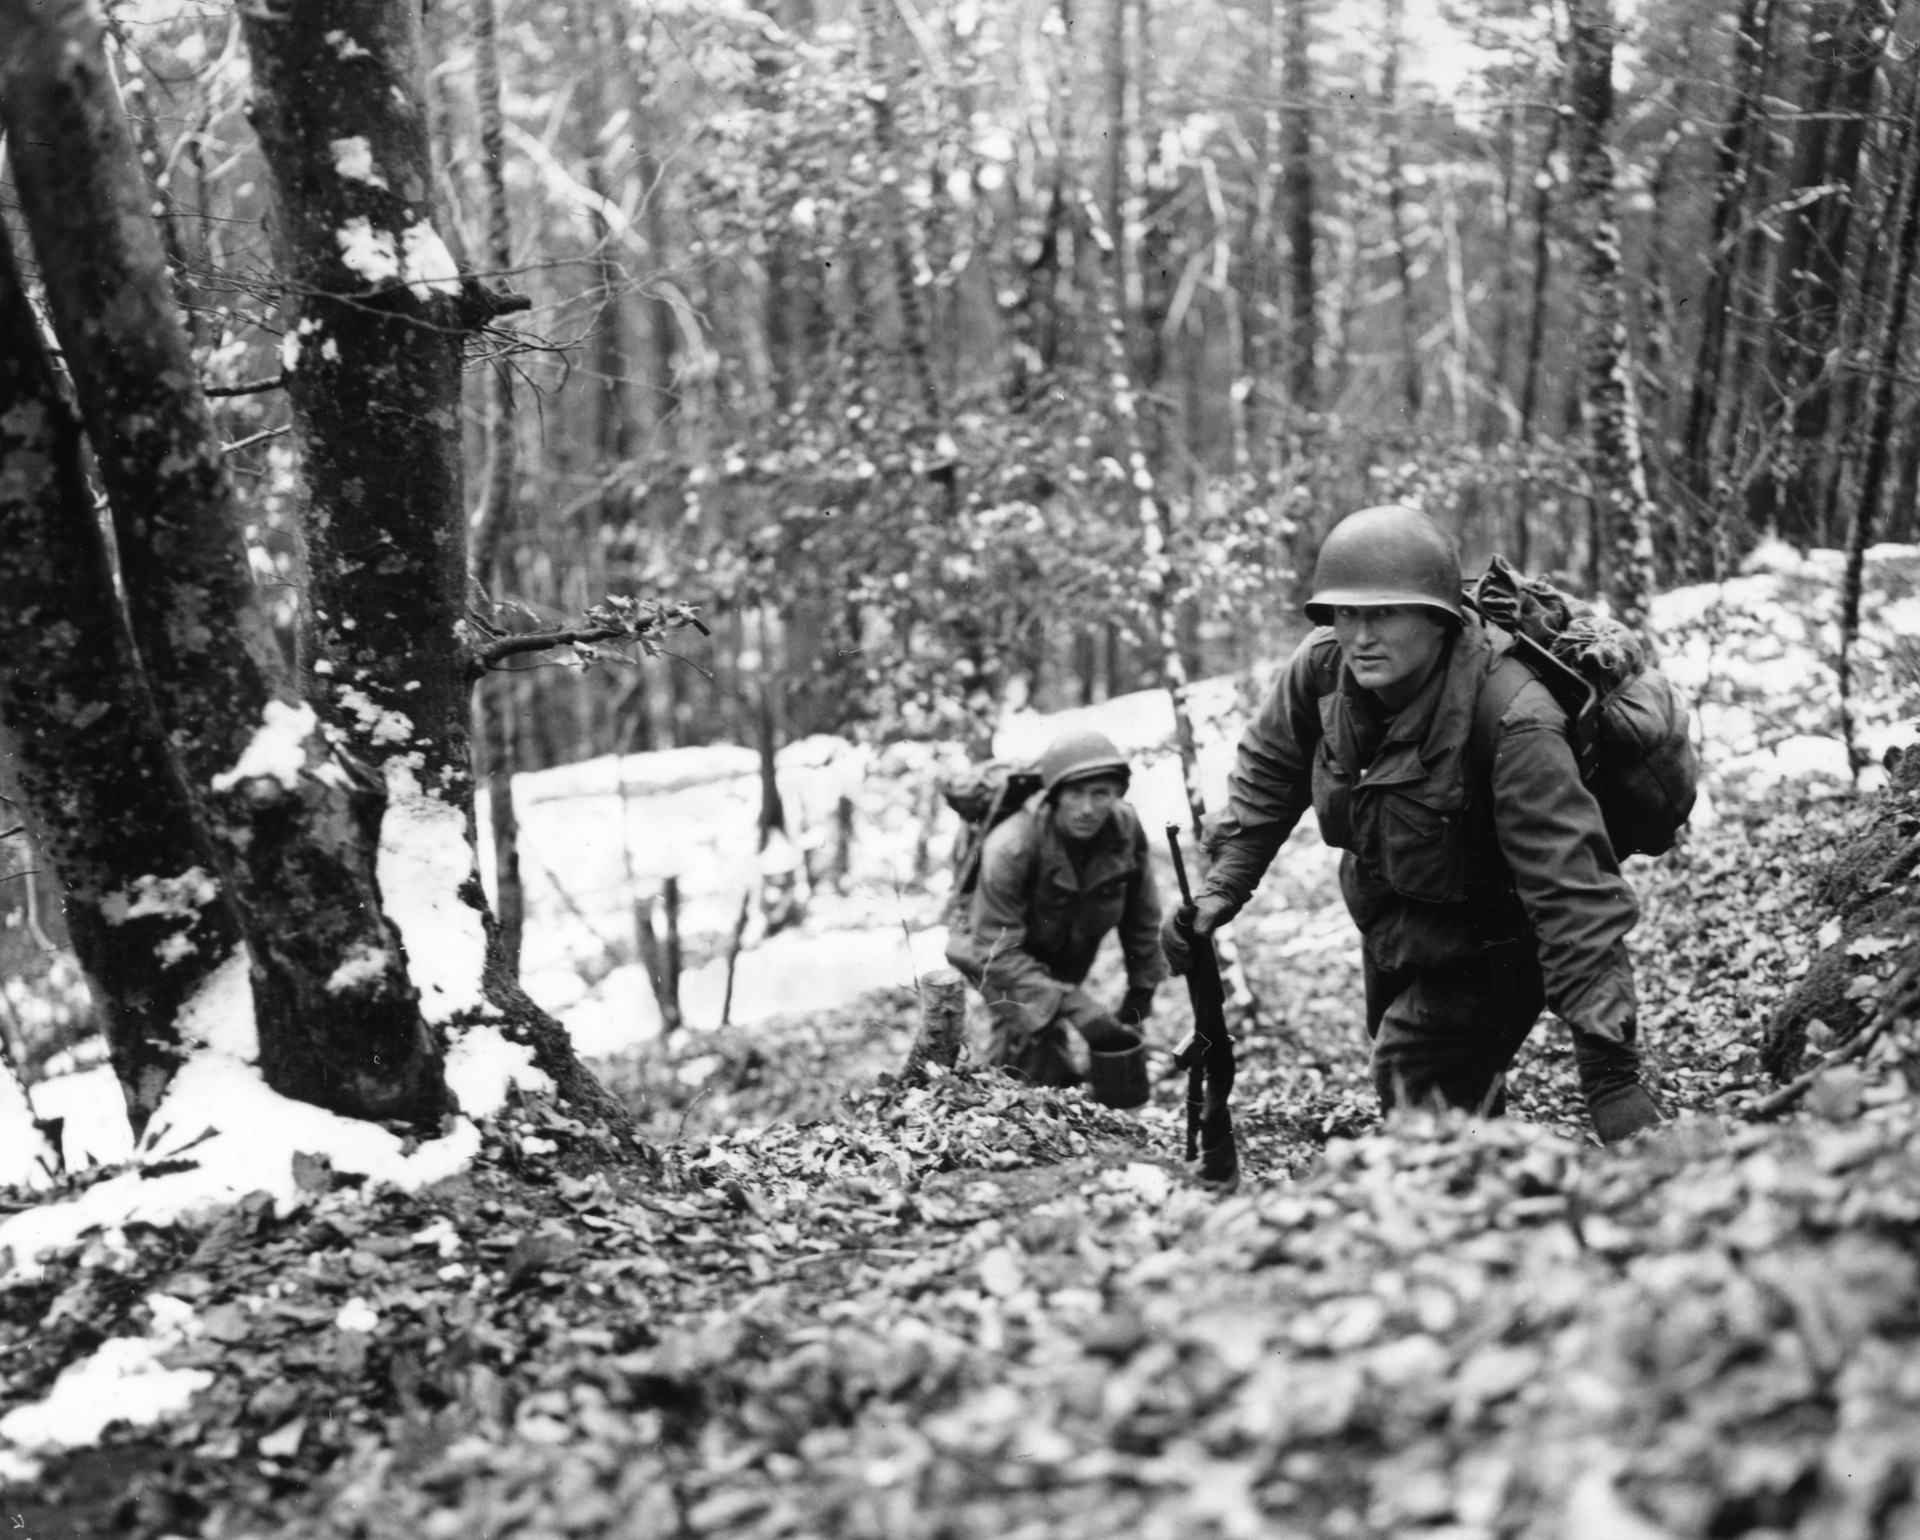 The survivors of Company C retreated to safety over snow-covered ridges in the forests south of Bannstein under protective fire provided by U.S. field artillery.